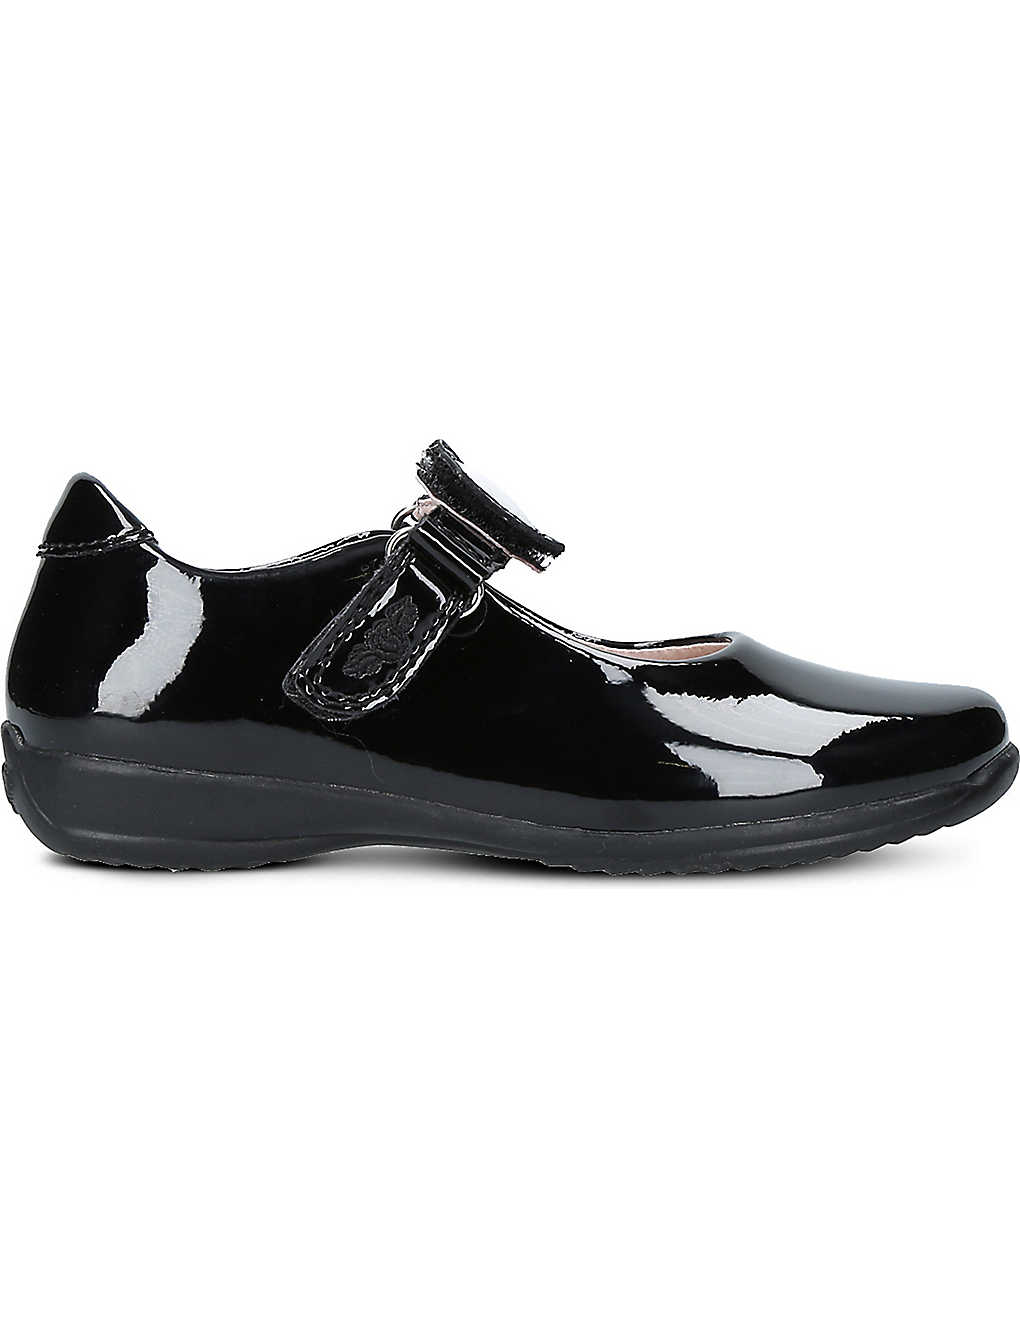 Lelli Kelly Kids' Colourissima Patent-leather School Shoes 3-9 Years In Black